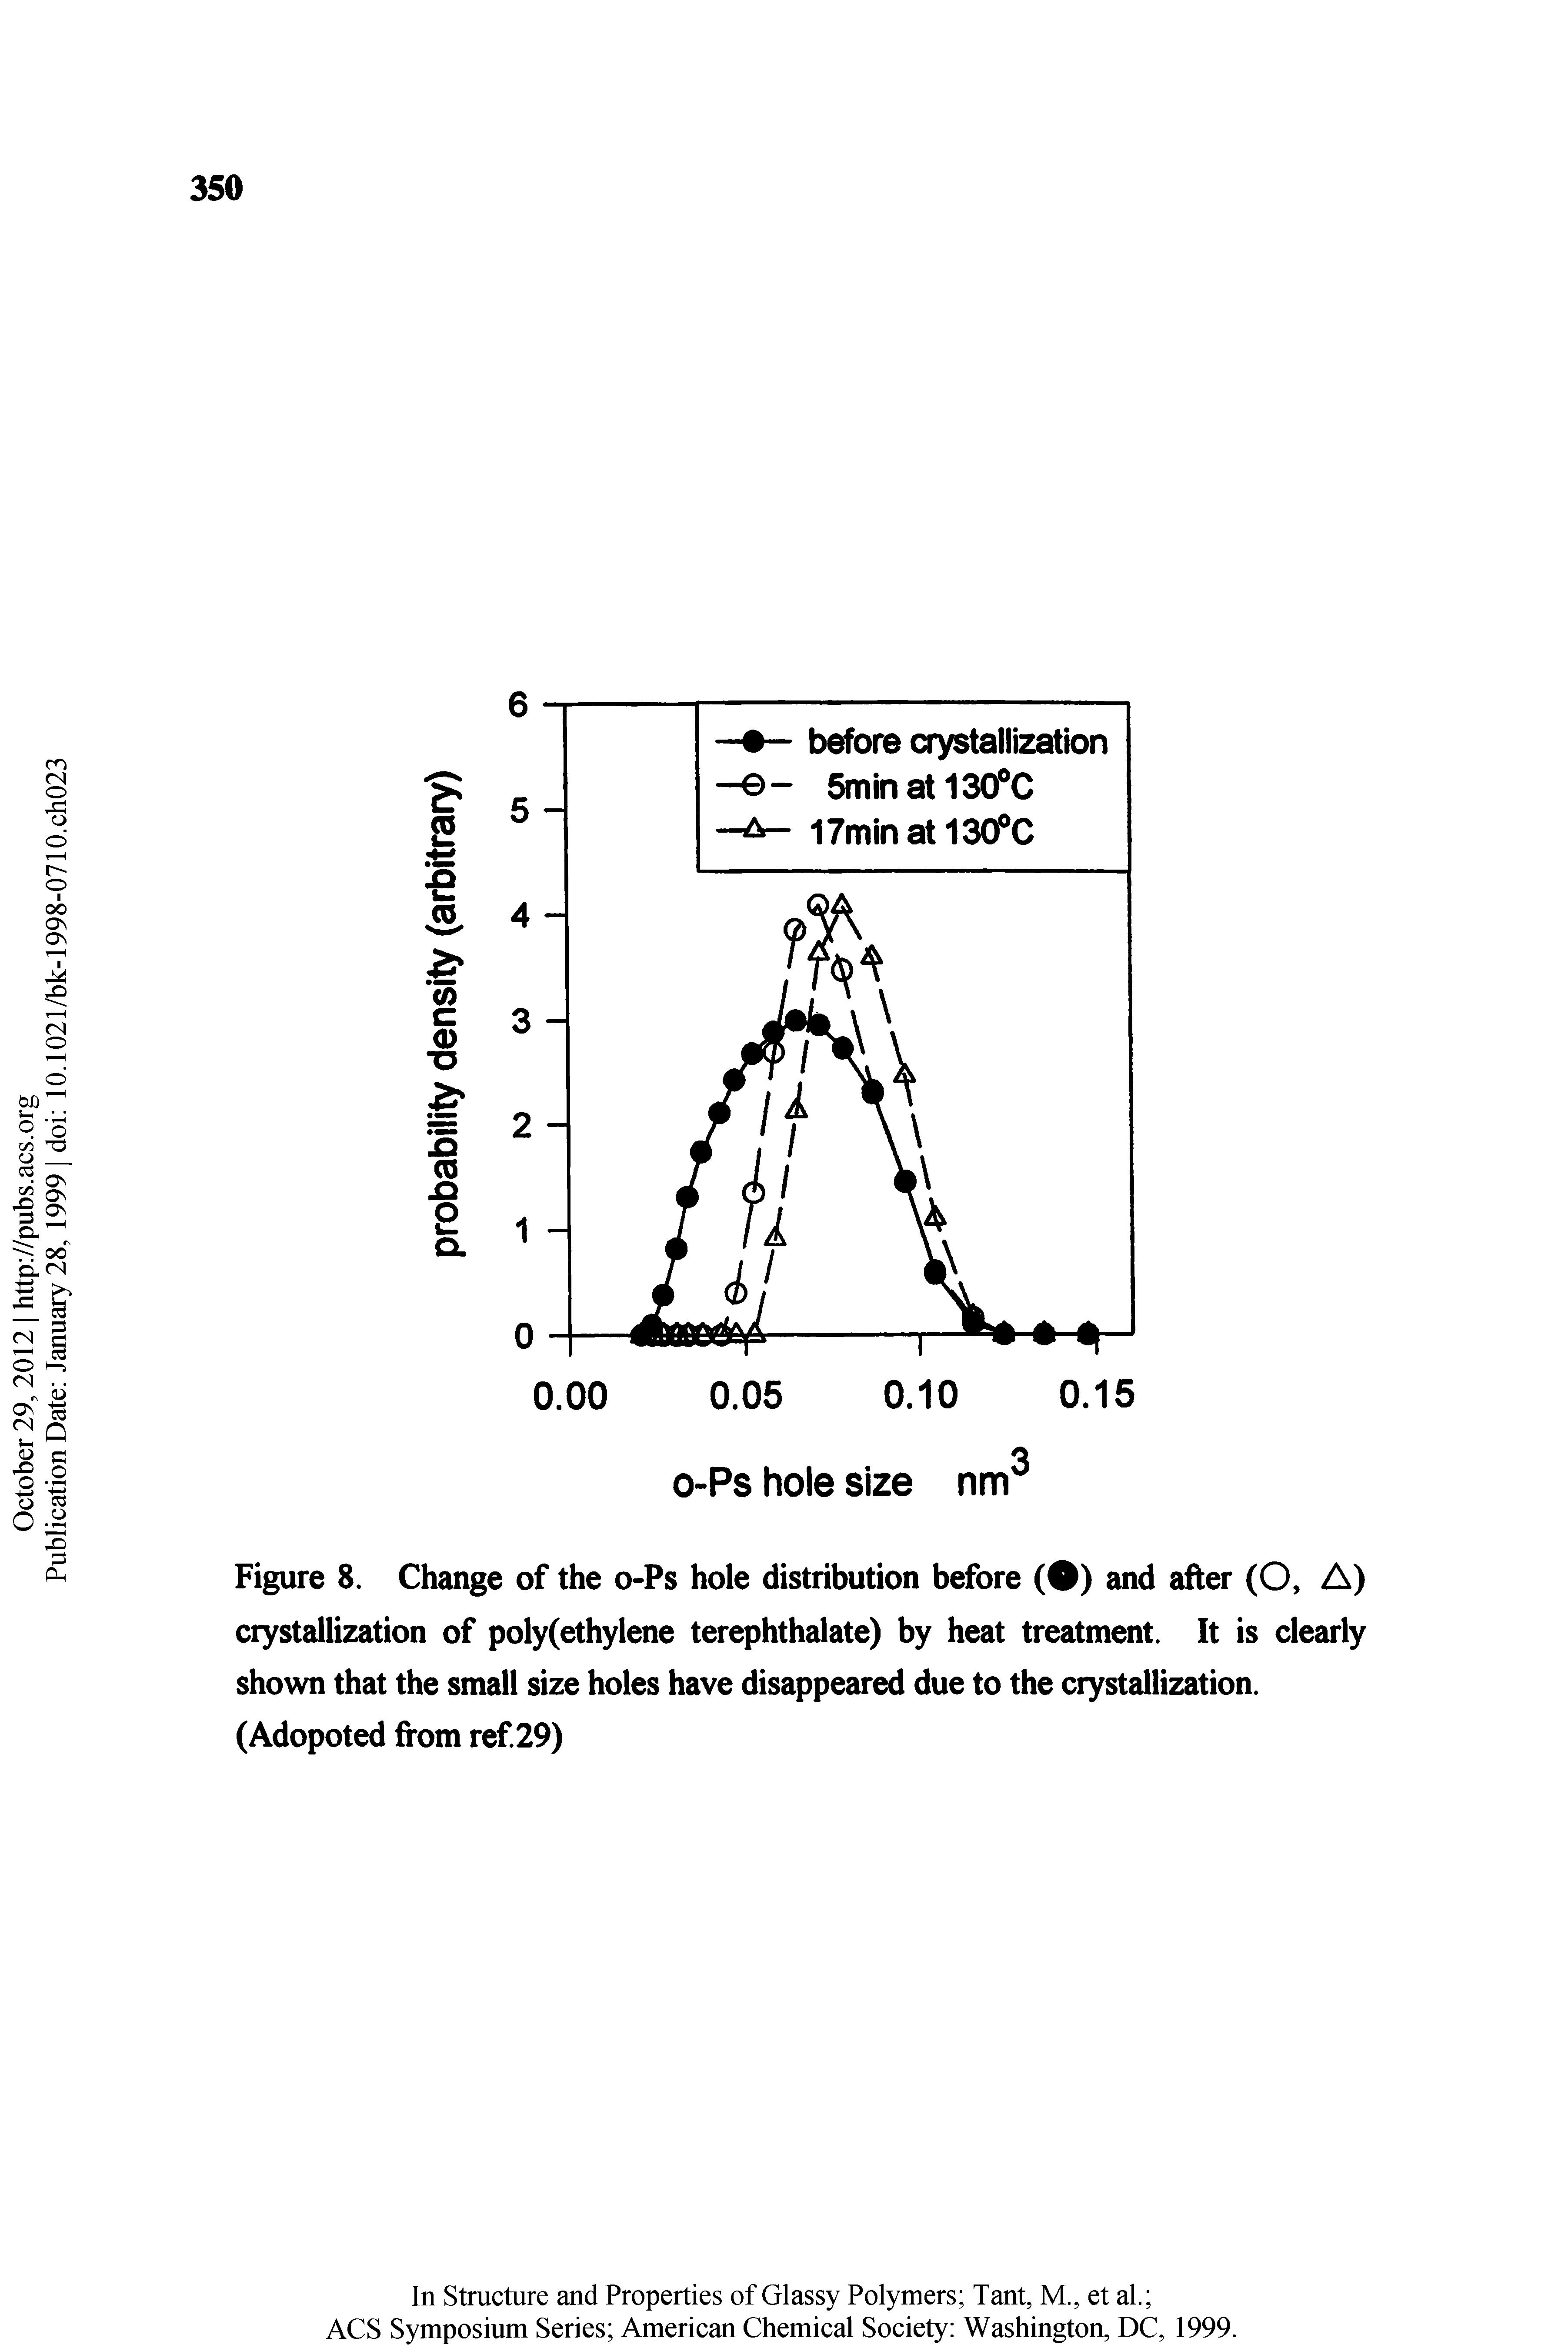 Figure 8. Change of the o-Ps hole distribution before ( ) and after (O, A) crystallization of poly(ethylene terephthalate) by heat treatment. It is clearly shown that the small size holes have disappeared due to the crystallization. (Adopoted from ref 29)...